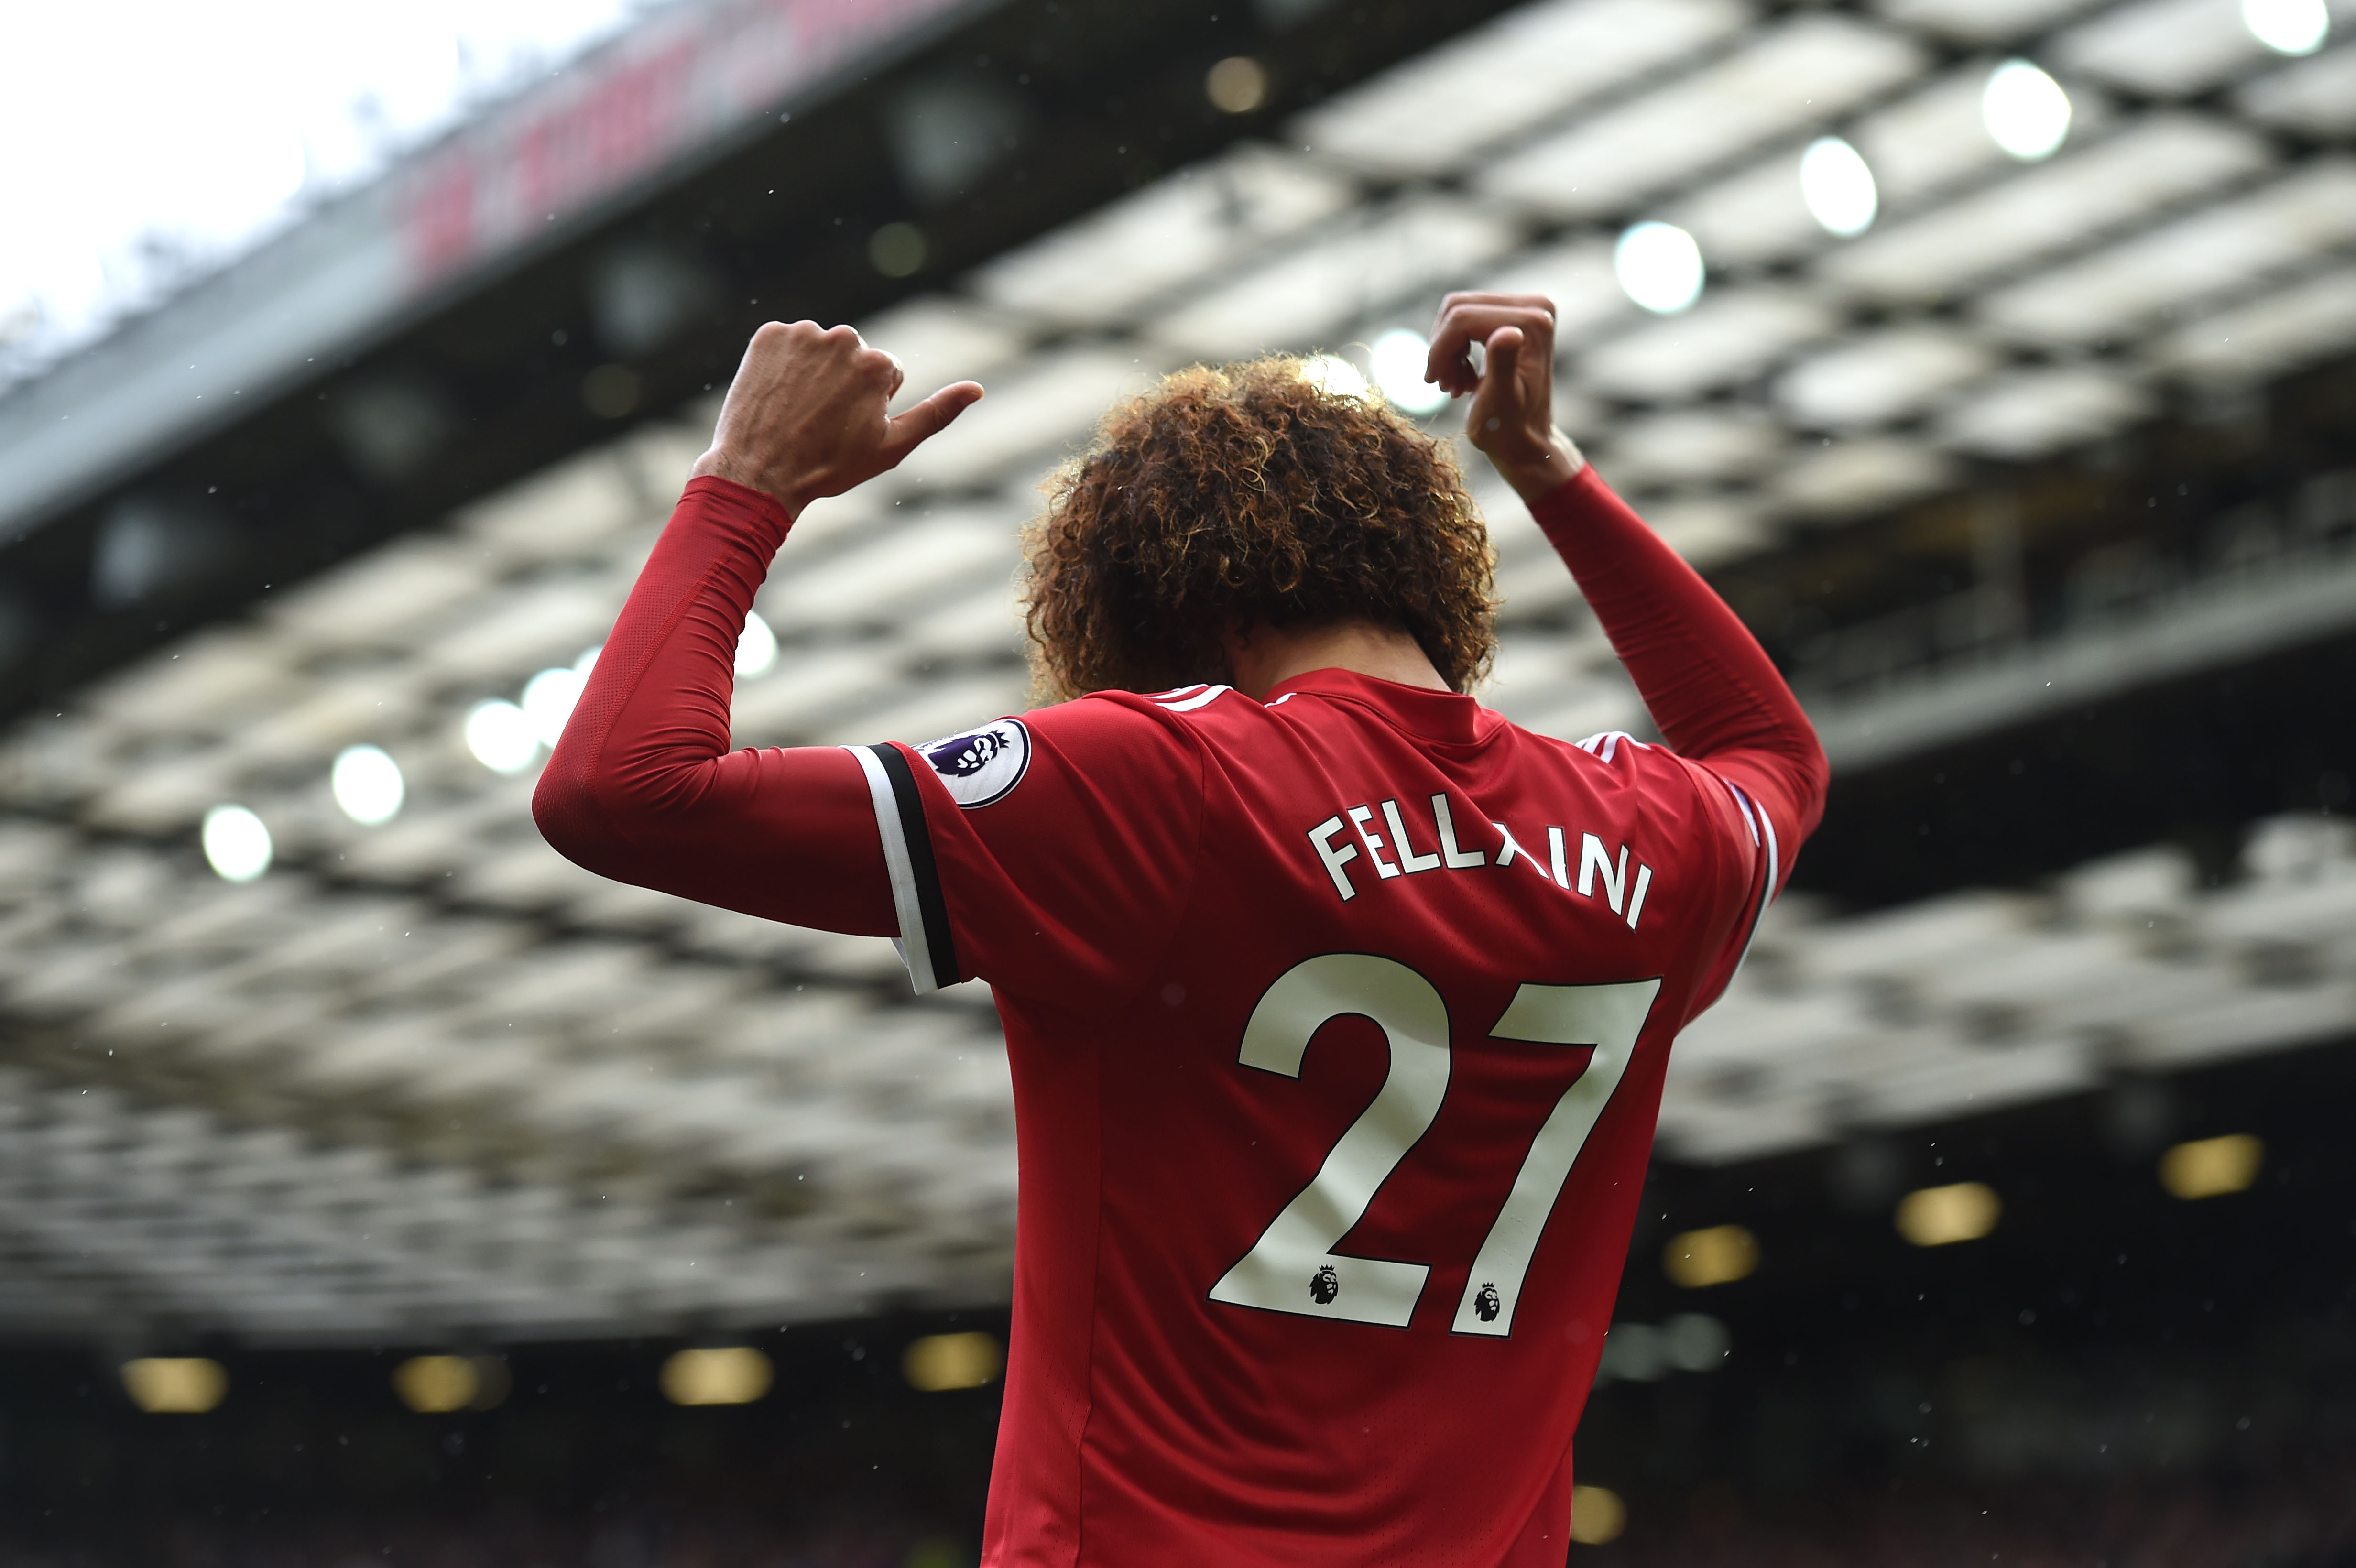 Manchester United's Belgian midfielder Marouane Fellaini celebrates scoring  the team's second goal during the English Premier League football match between Manchester United and Crystal Palace at Old Trafford in Manchester, north west England, on September 30, 2017. / AFP PHOTO / PAUL ELLIS / RESTRICTED TO EDITORIAL USE. No use with unauthorized audio, video, data, fixture lists, club/league logos or 'live' services. Online in-match use limited to 75 images, no video emulation. No use in betting, games or single club/league/player publications.  /         (Photo credit should read PAUL ELLIS/AFP/Getty Images)